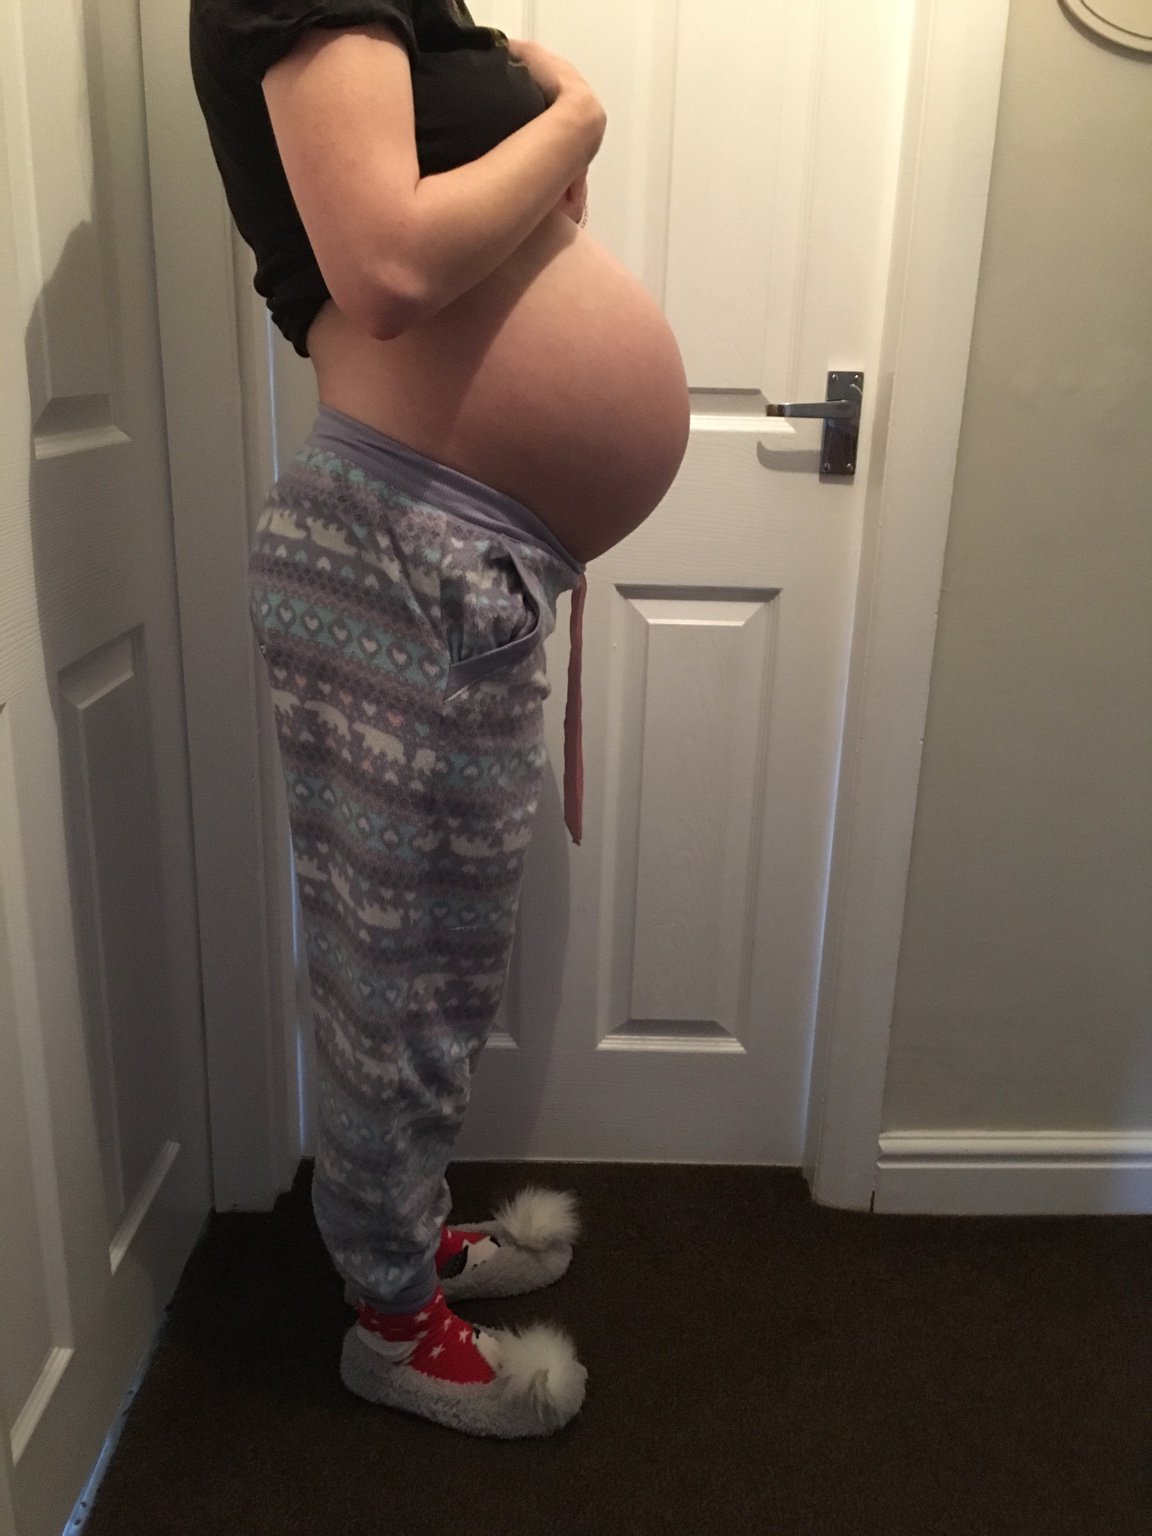 33 Weeks Pregnant: Symptoms, Movement, Belly & More